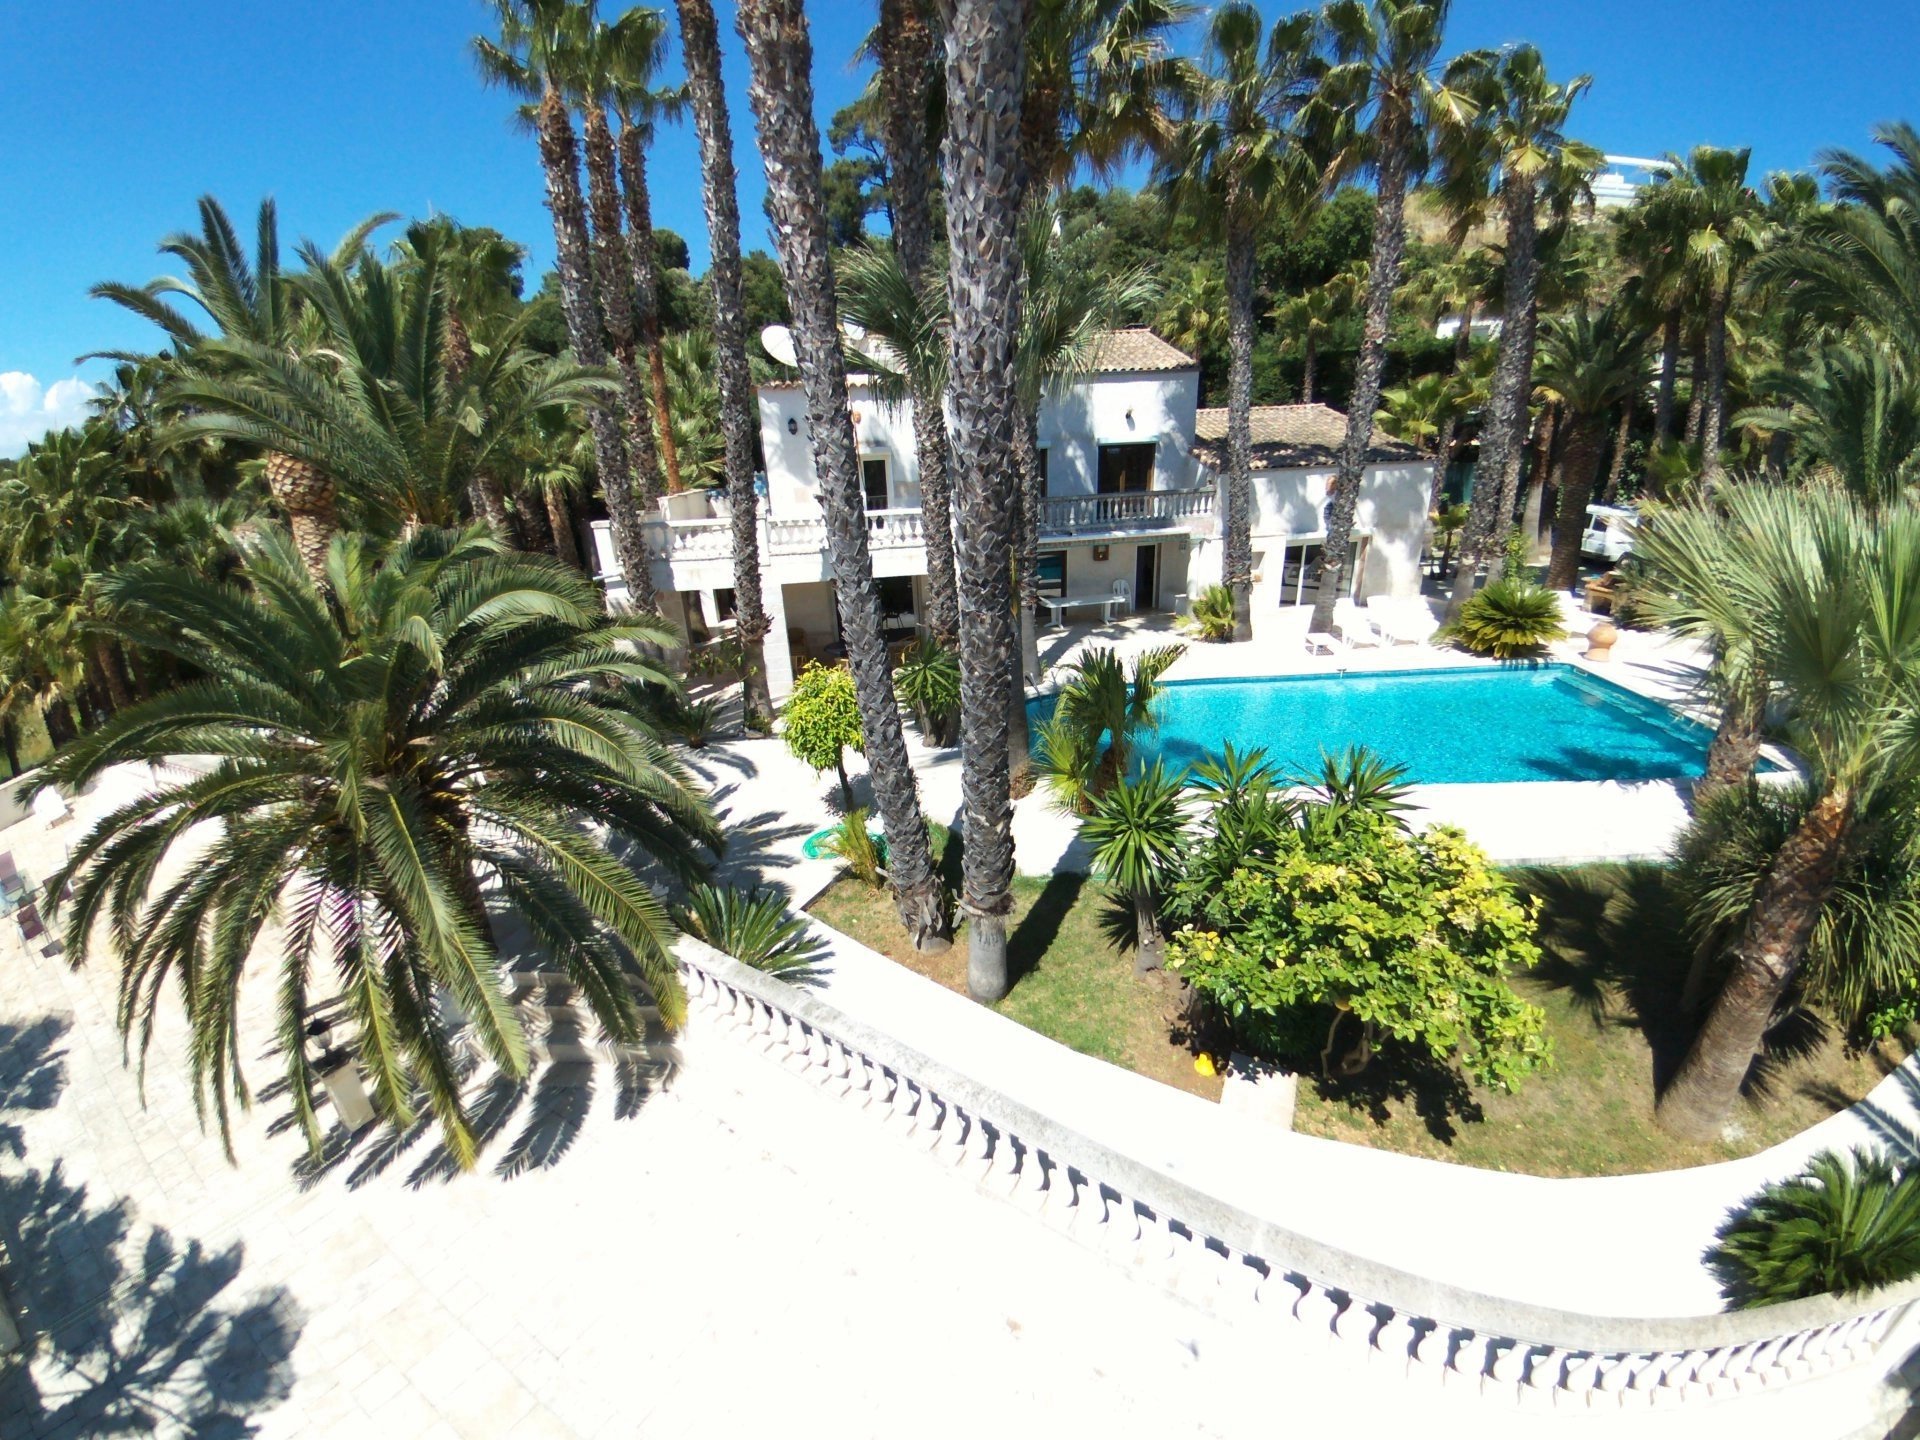 VILLA WITH A PALM GROVE BIOT HEIGHTS